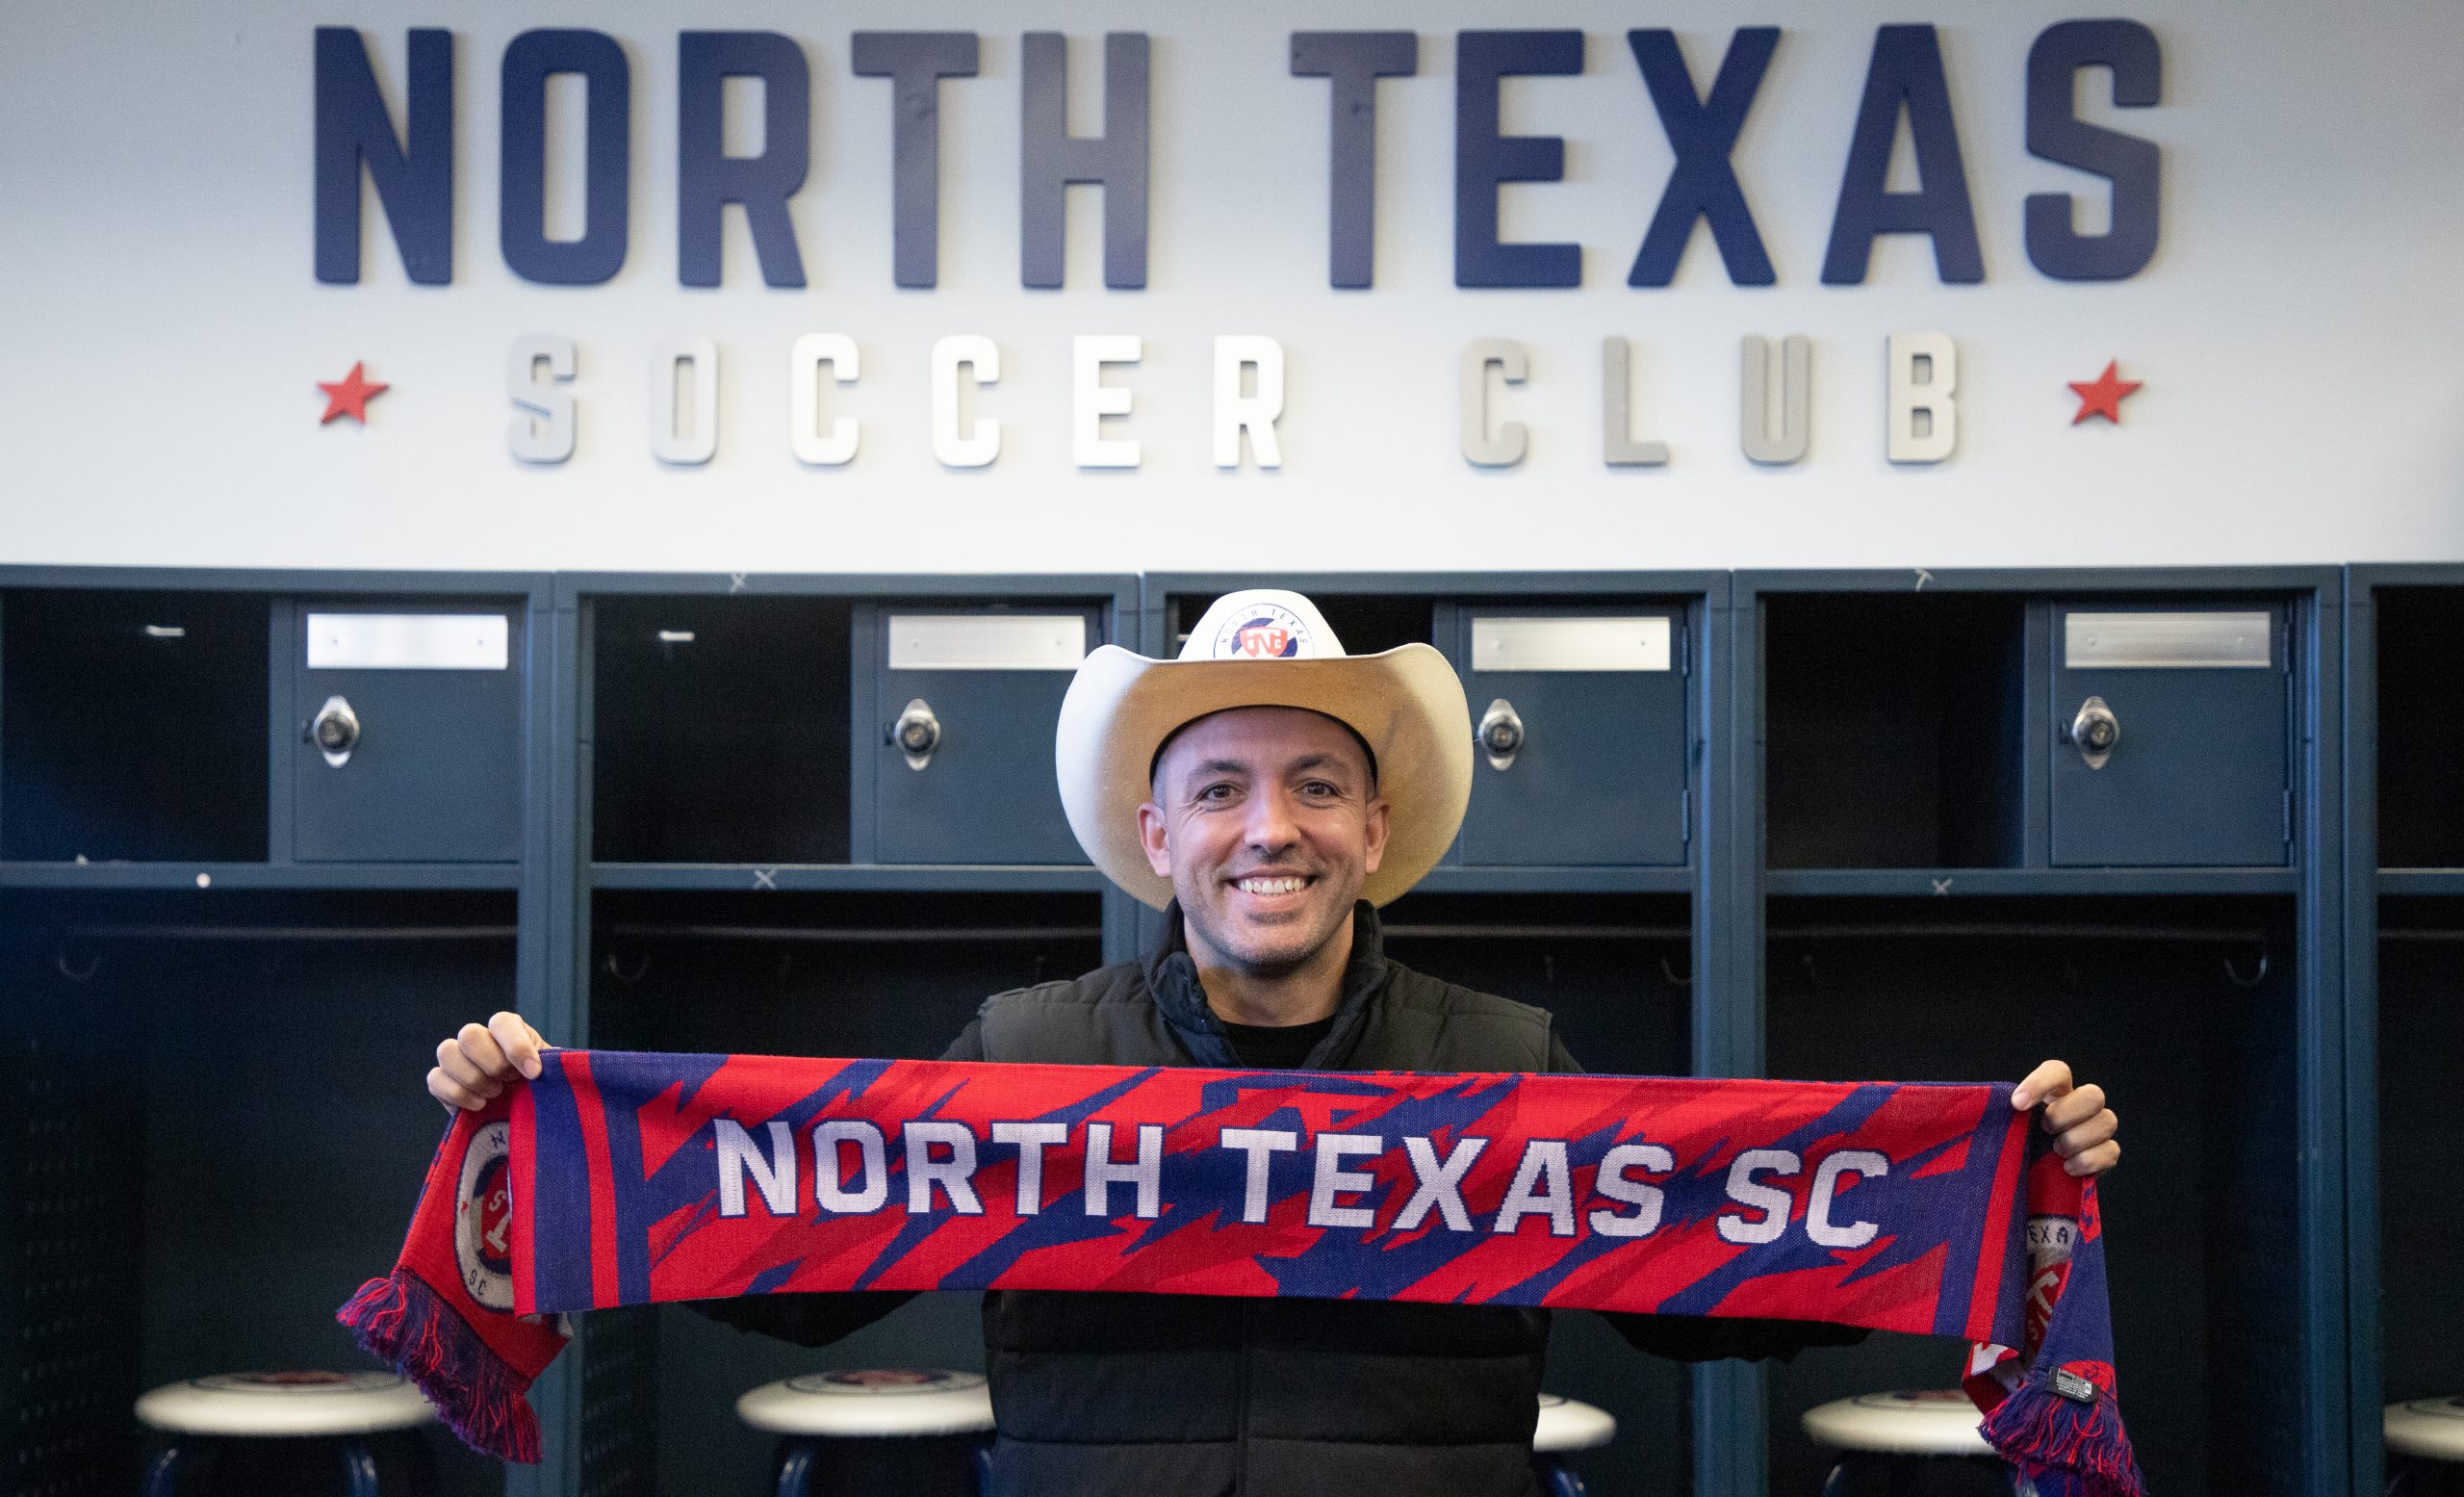 Javier Cano is announced as North Texas SC's new coach. (Courtesy North Texas SC)